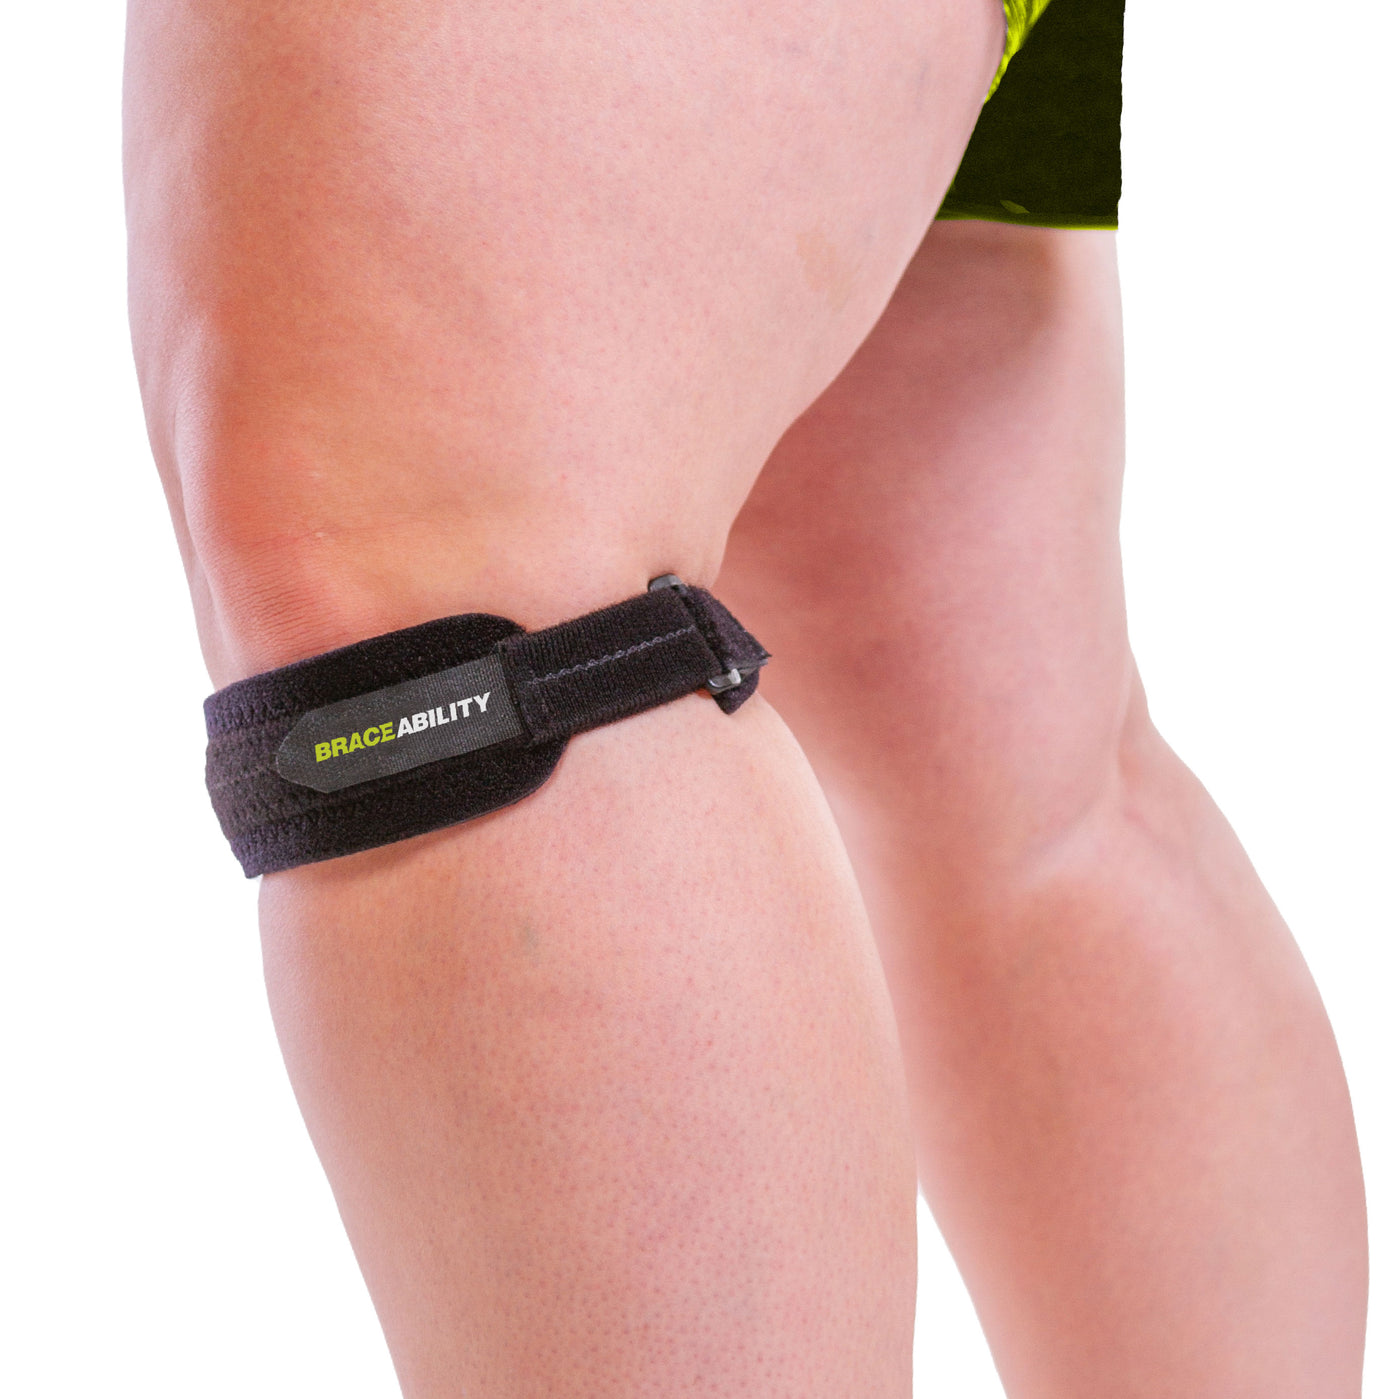 The patellar tendon support strap comes in plus sizes up to 2XL that supports patella and stops knee from clicking hide_on_site